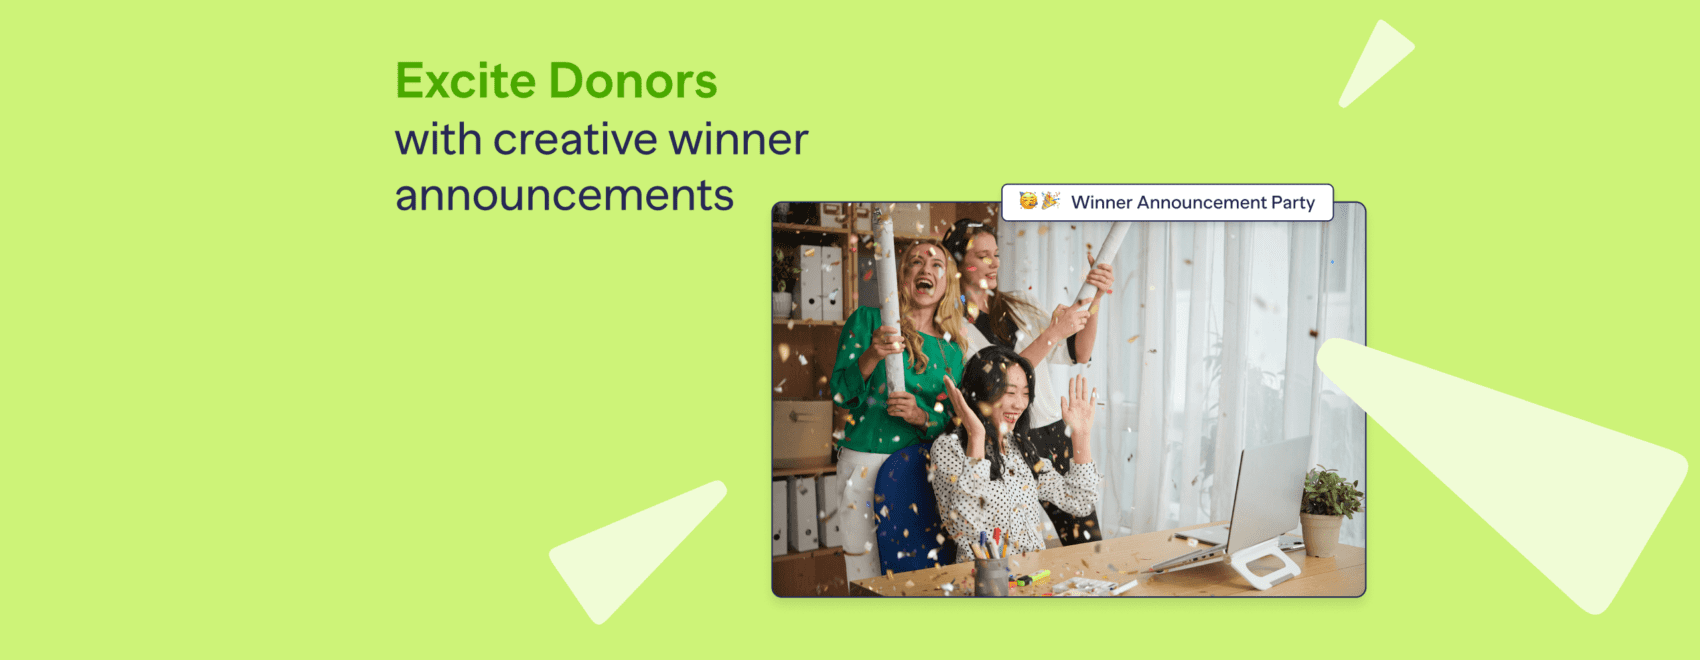 Excite donors with creative winner announcements